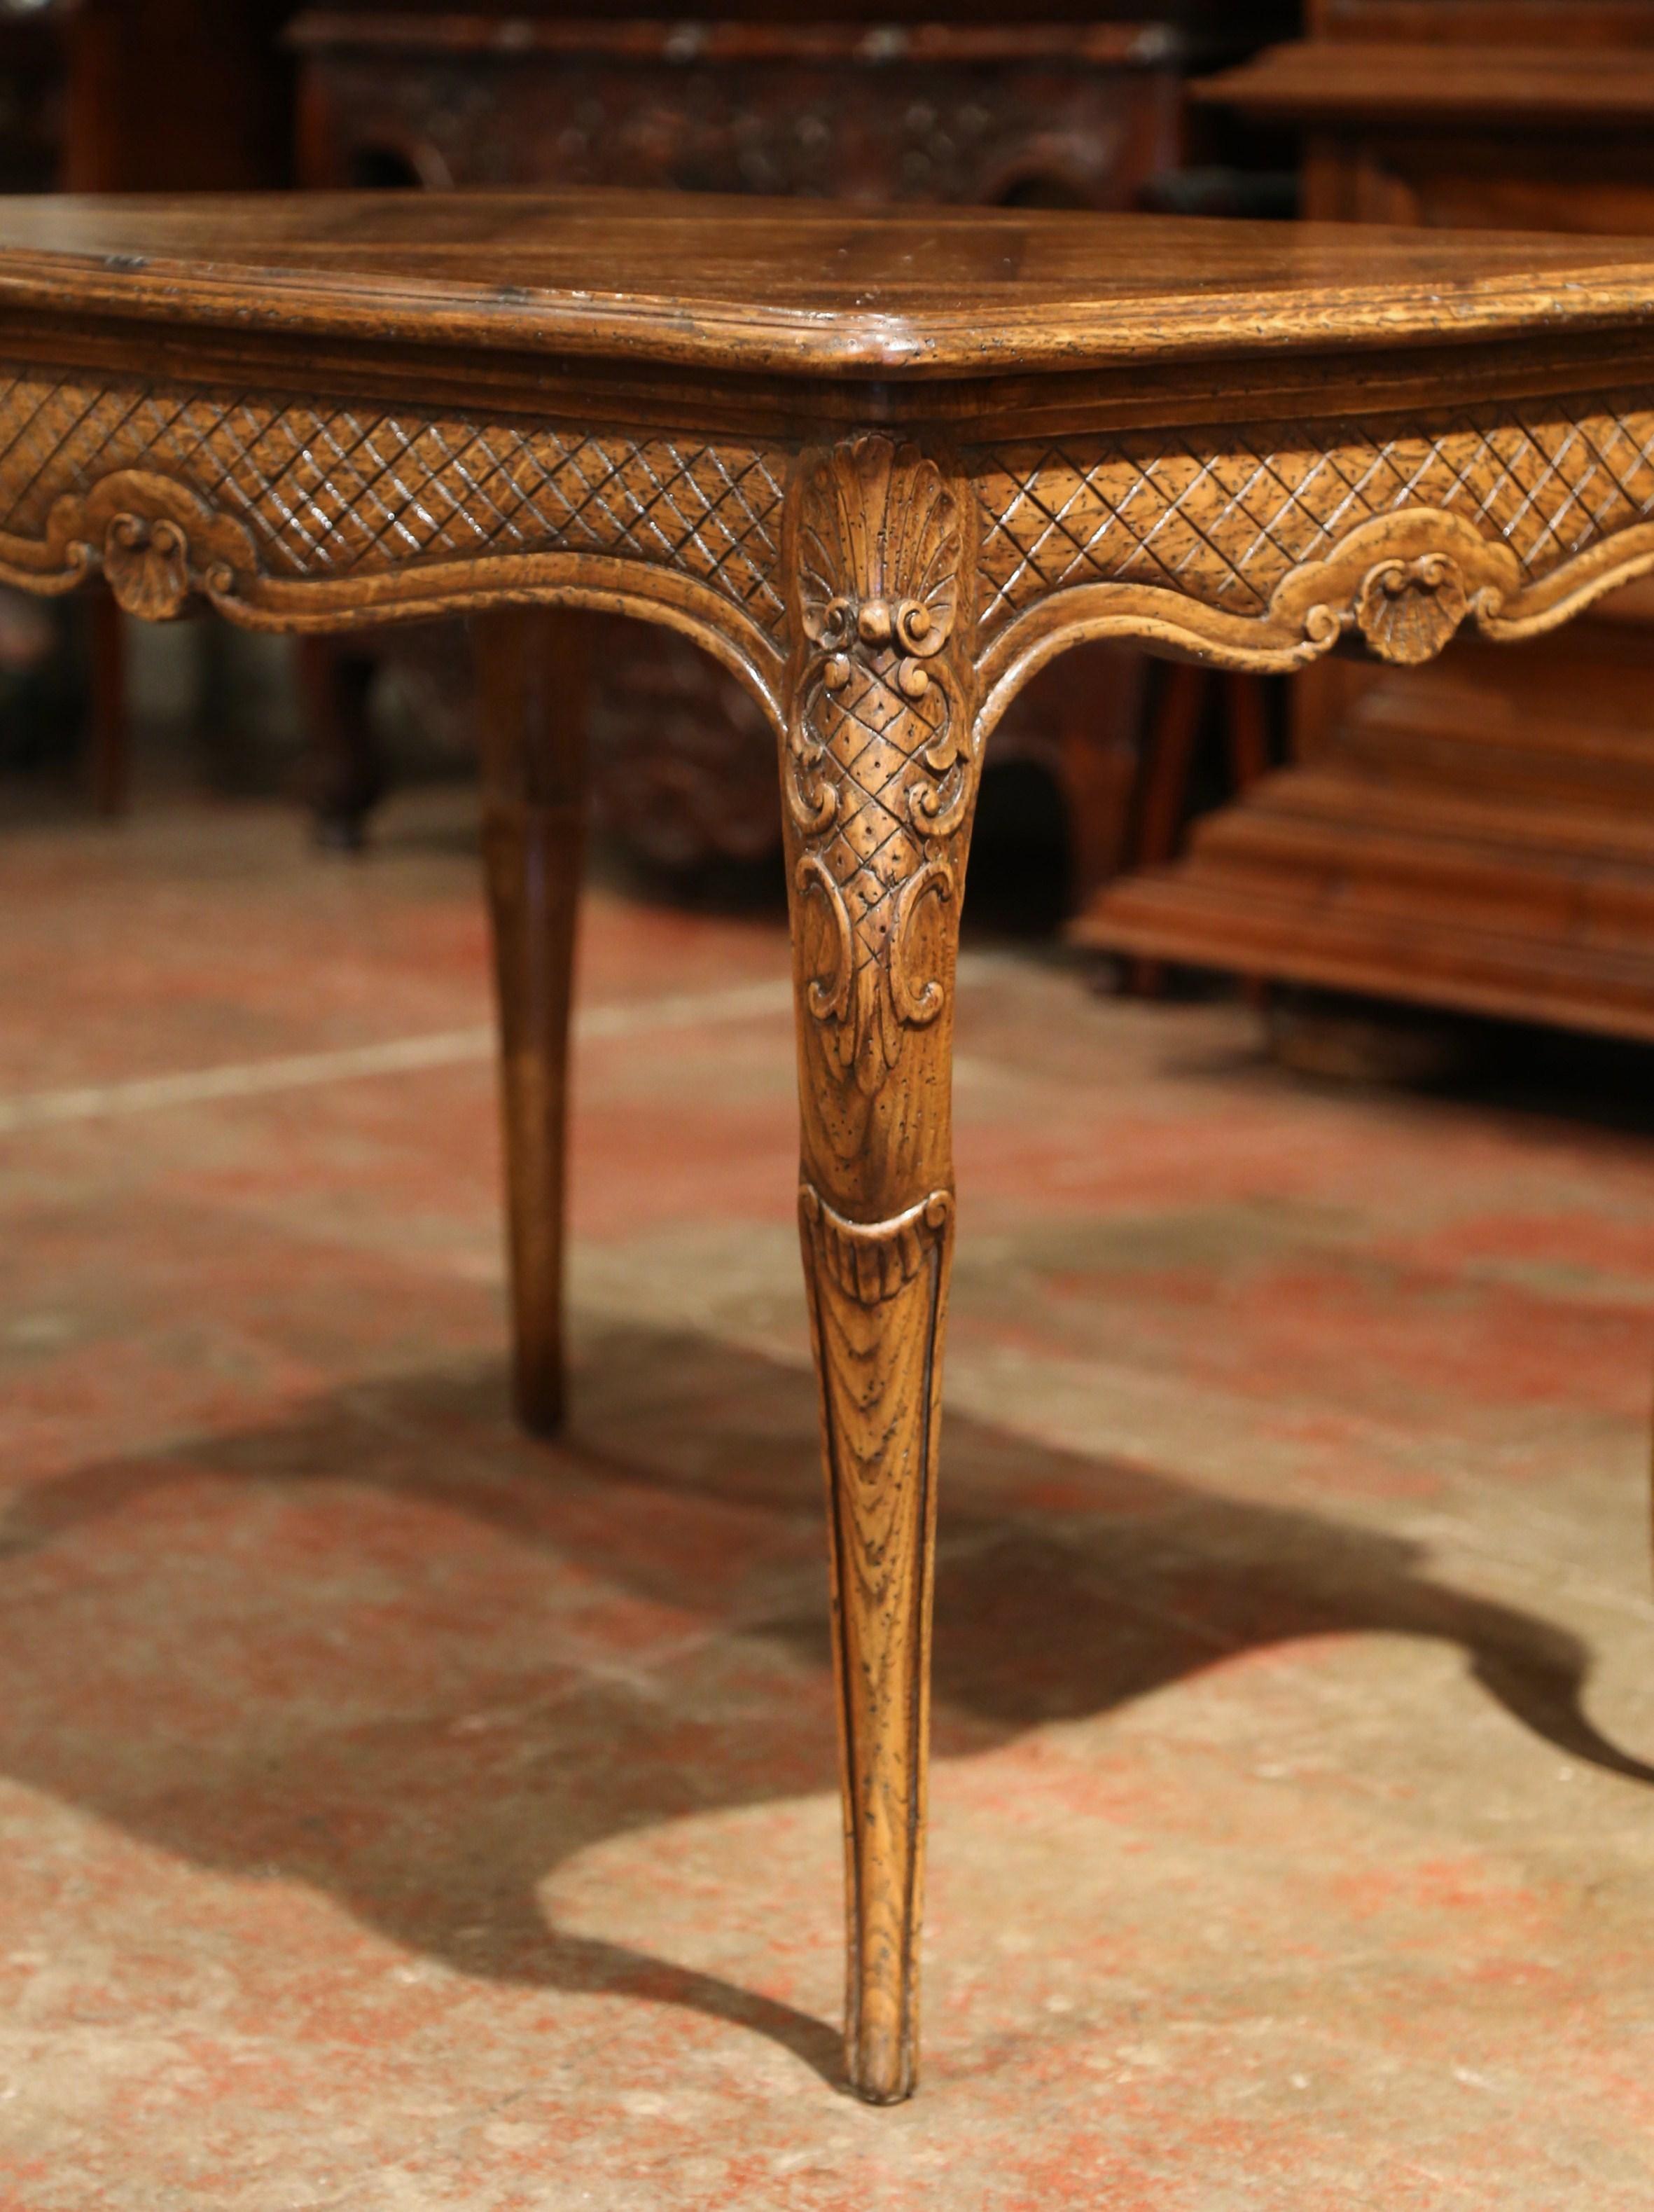 20th Century Midcentury French Louis XV Carved Oak Side Table with Inlay Parquetry Decor For Sale